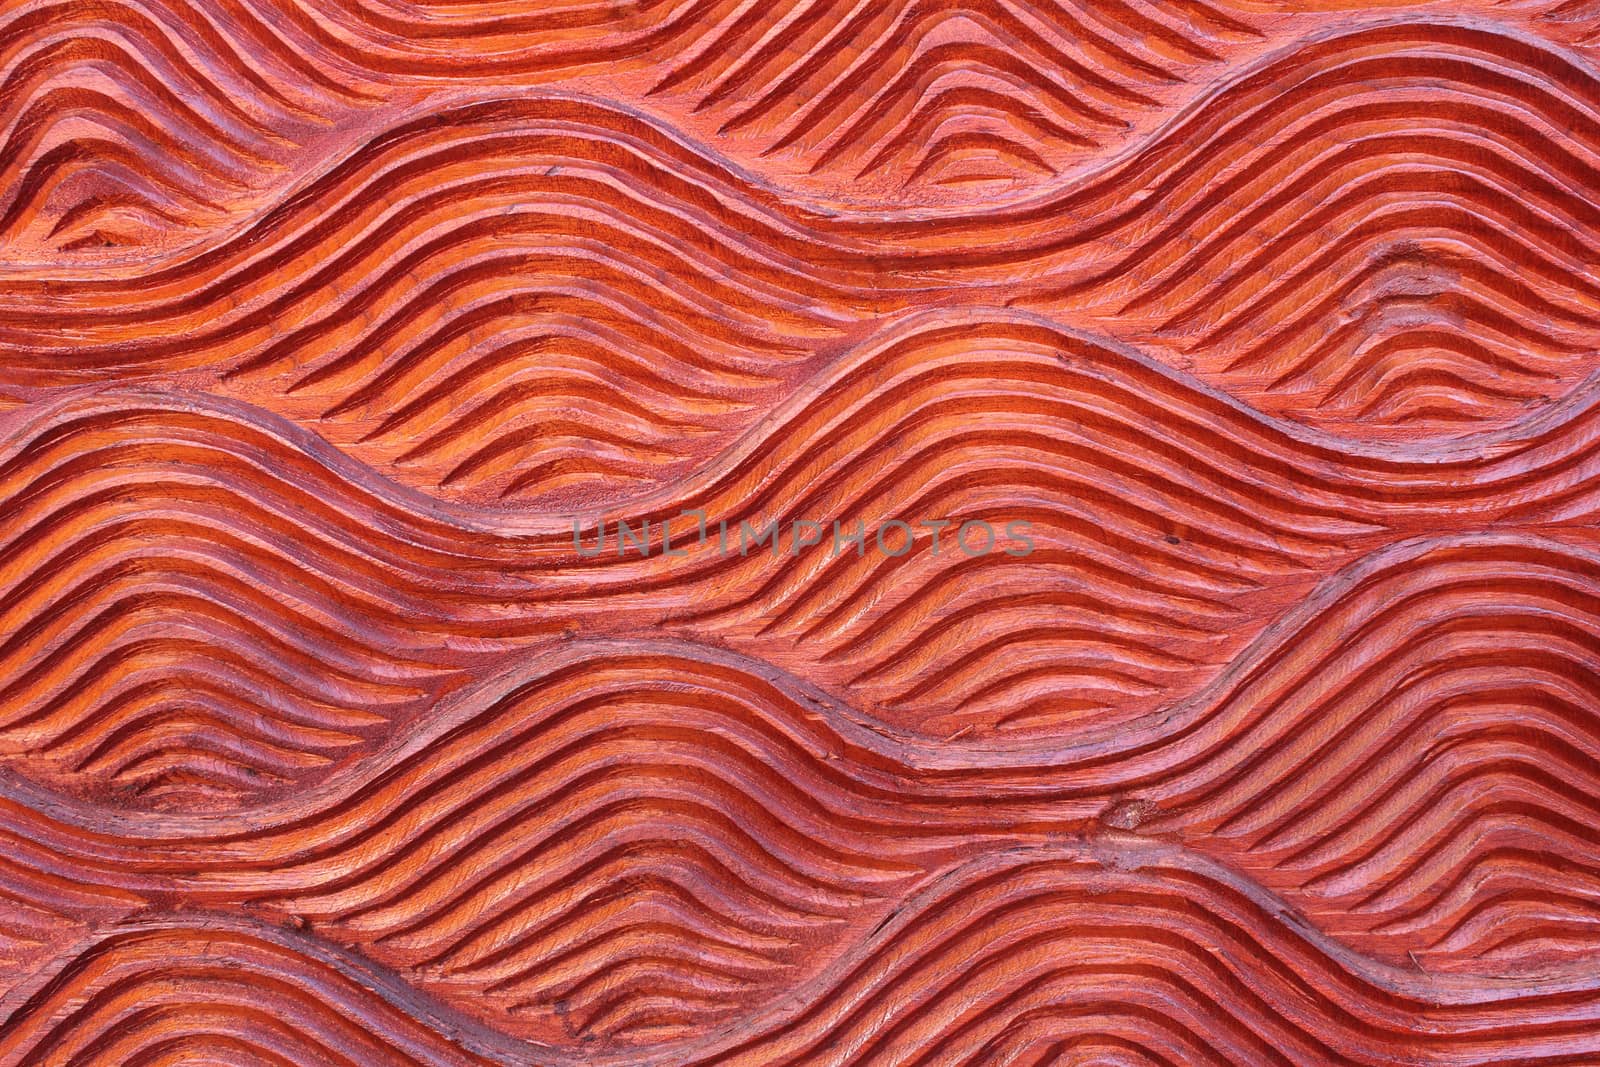 Background of wave pattern on wood carving